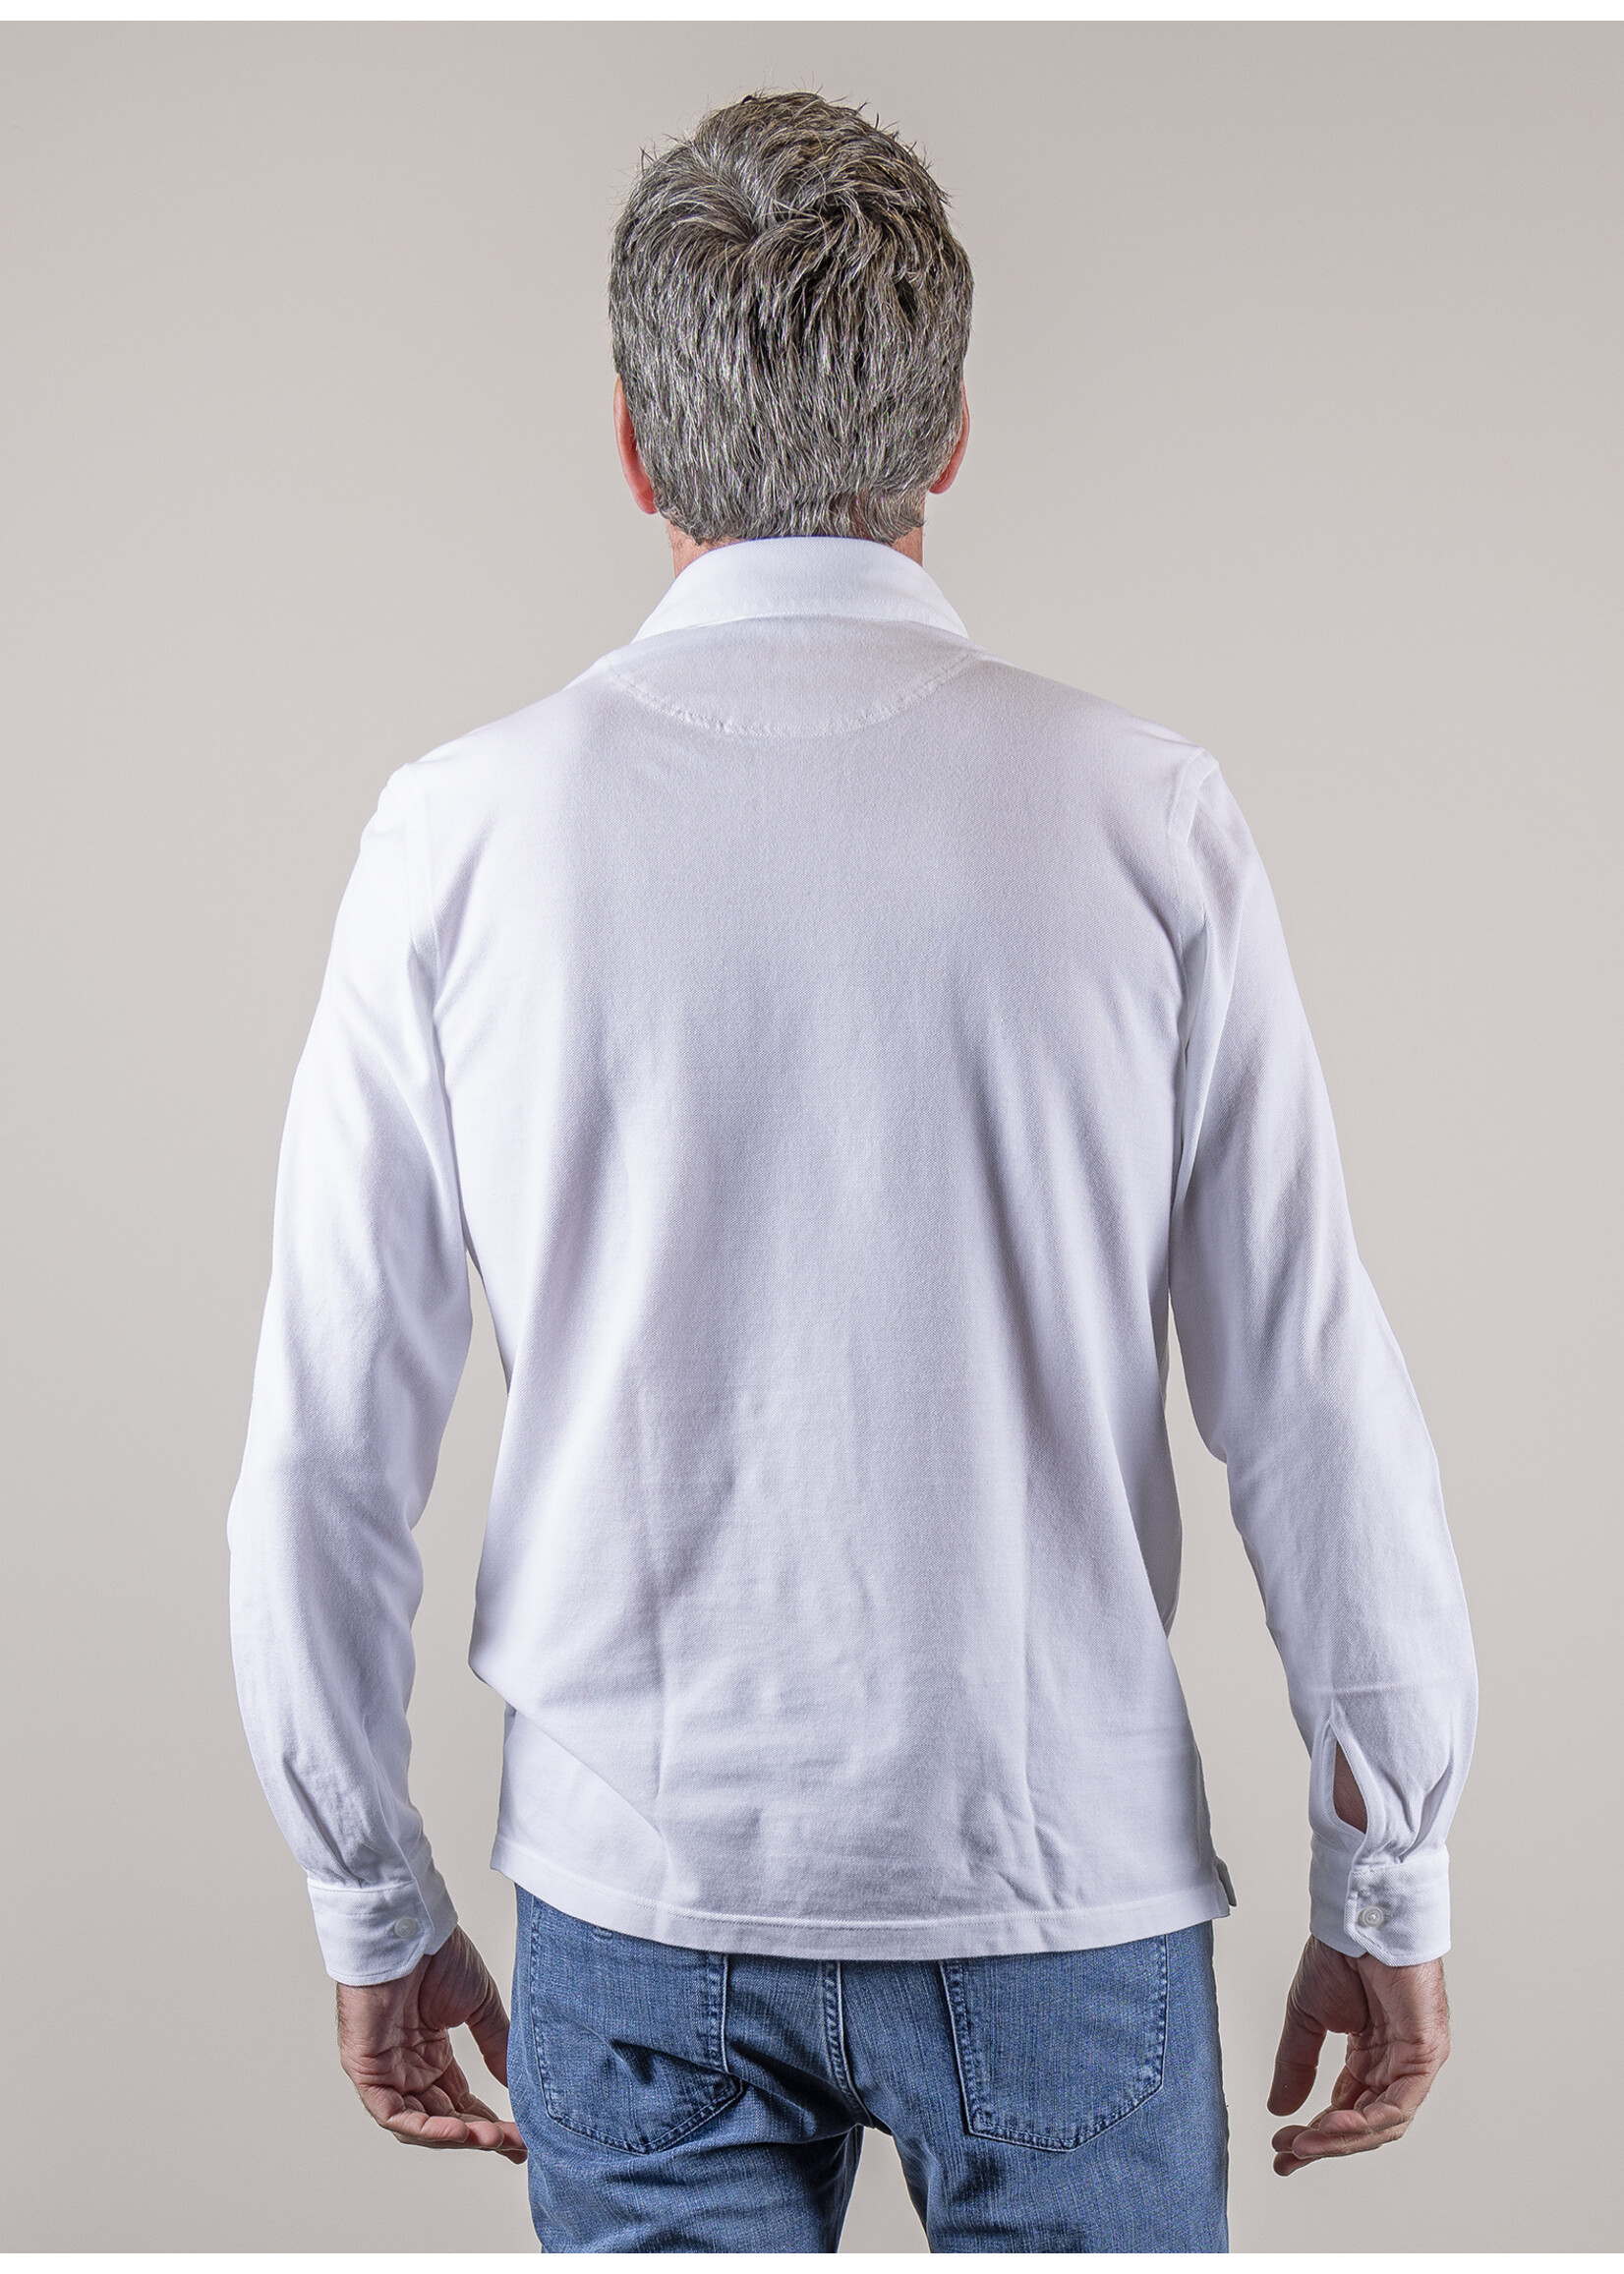 Ridiculous Classic Washed Cotton Polo Long Sleeve White